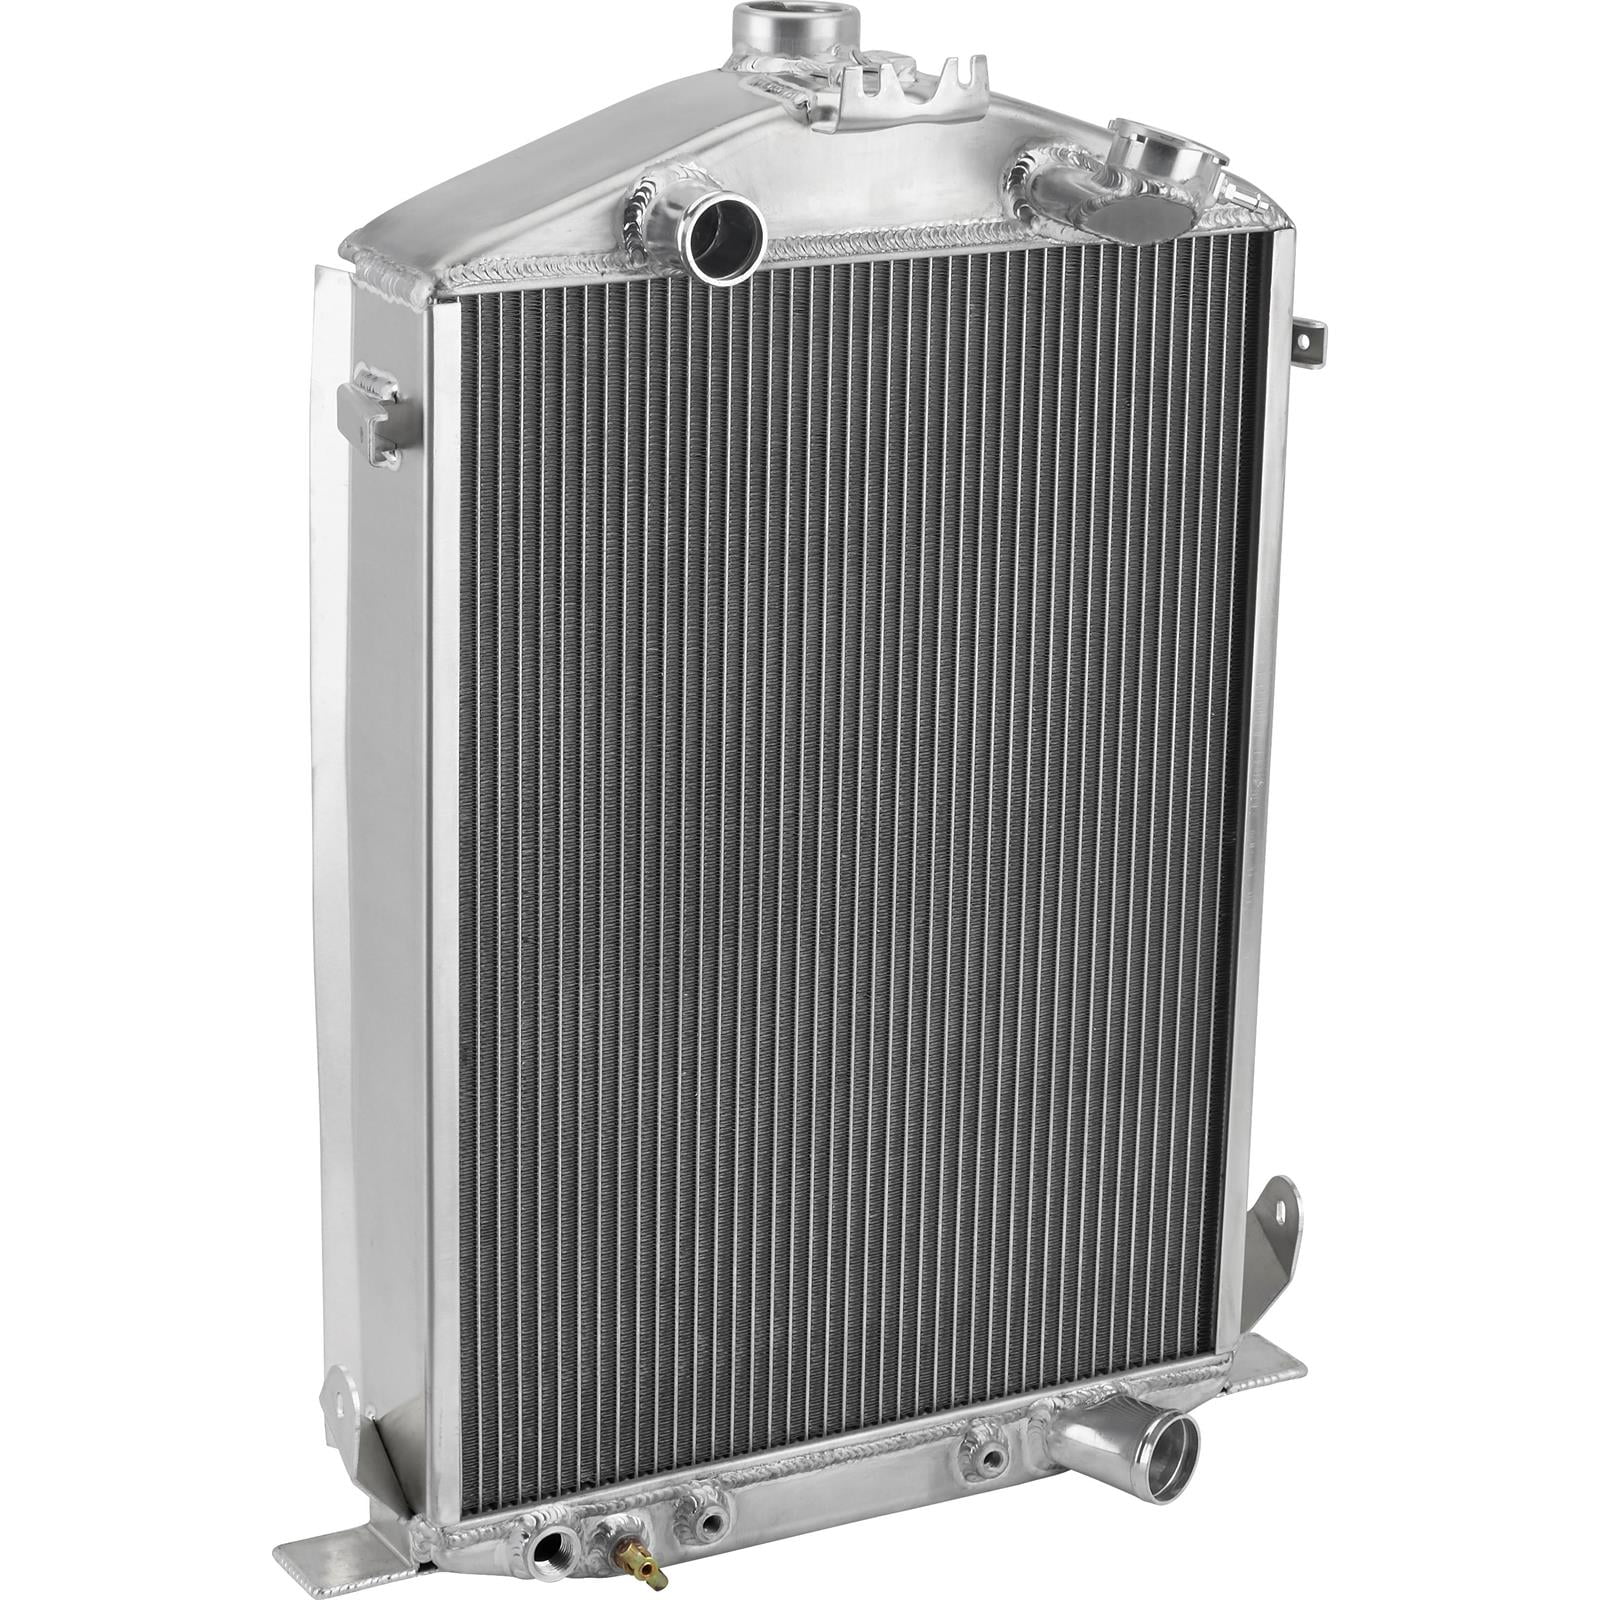 4 Row Western Champion Radiator for 1932 Ford Chopped Chevy/Mopar Configuration